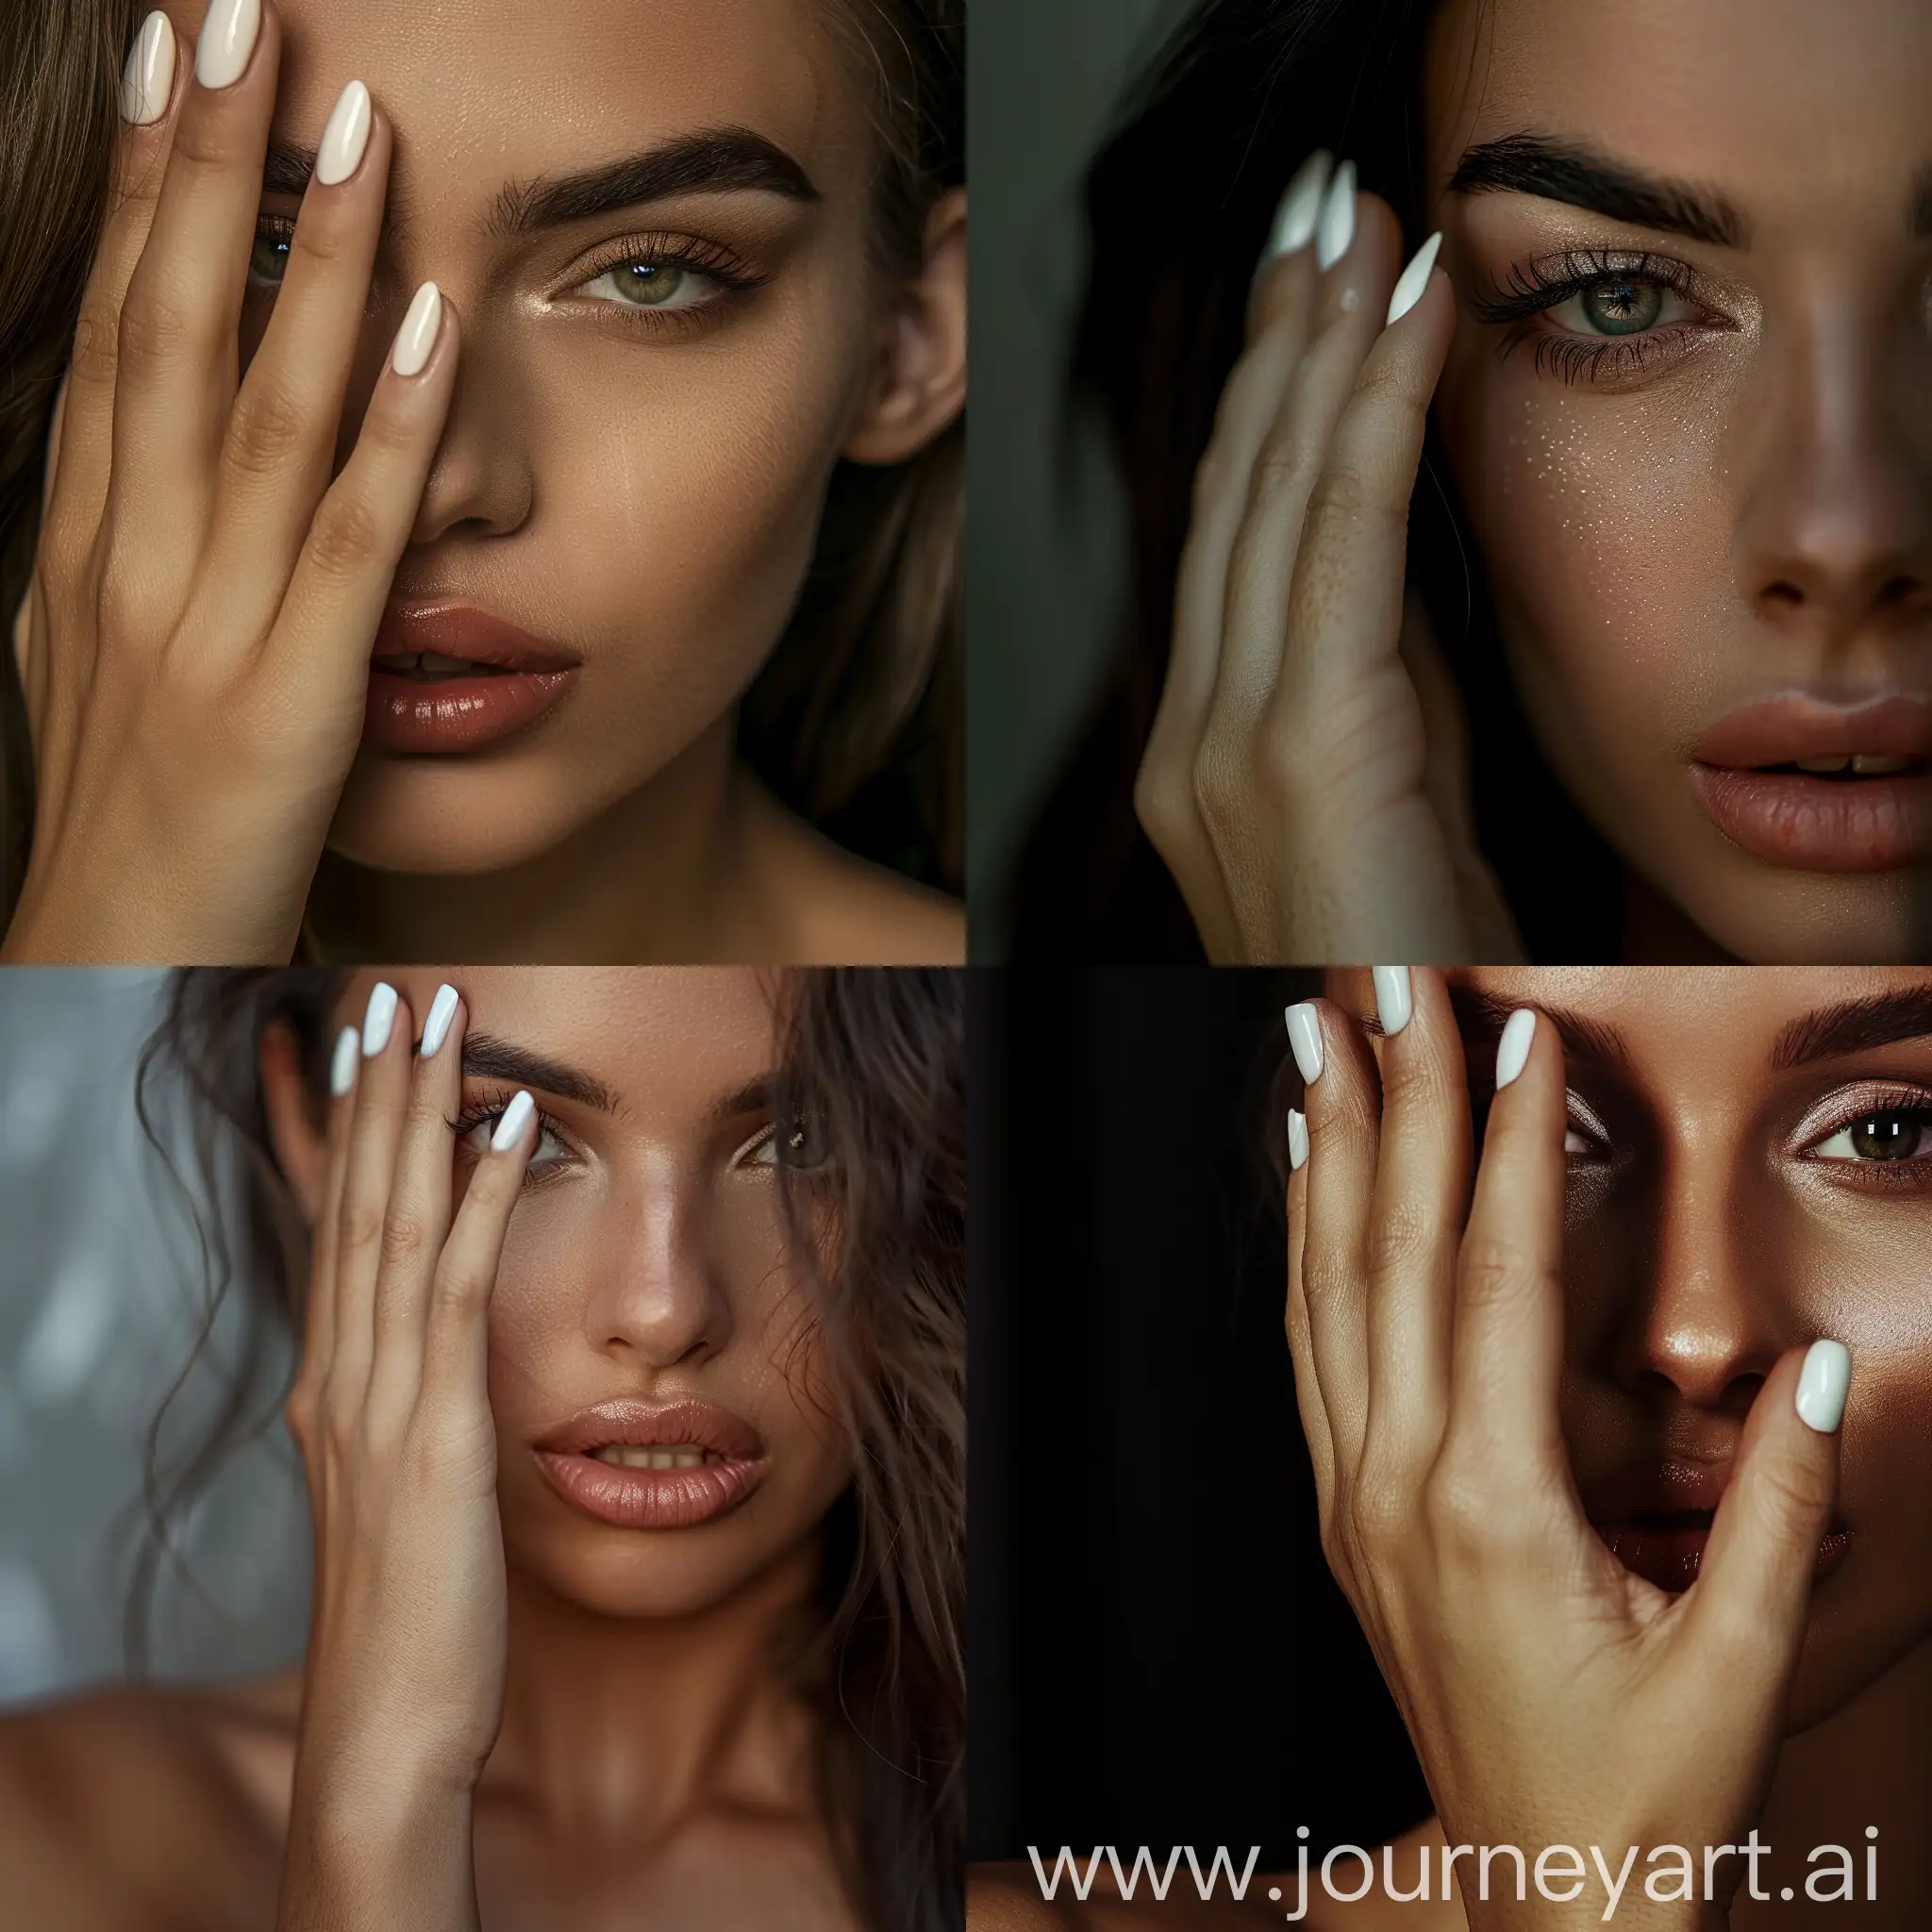 Photography: Female super model covering left side of face with hand, white nail polish, captivating portrait, professional, studio lighting, cheekbones, jawline, thick lips, bushy eyebrows, brunette 